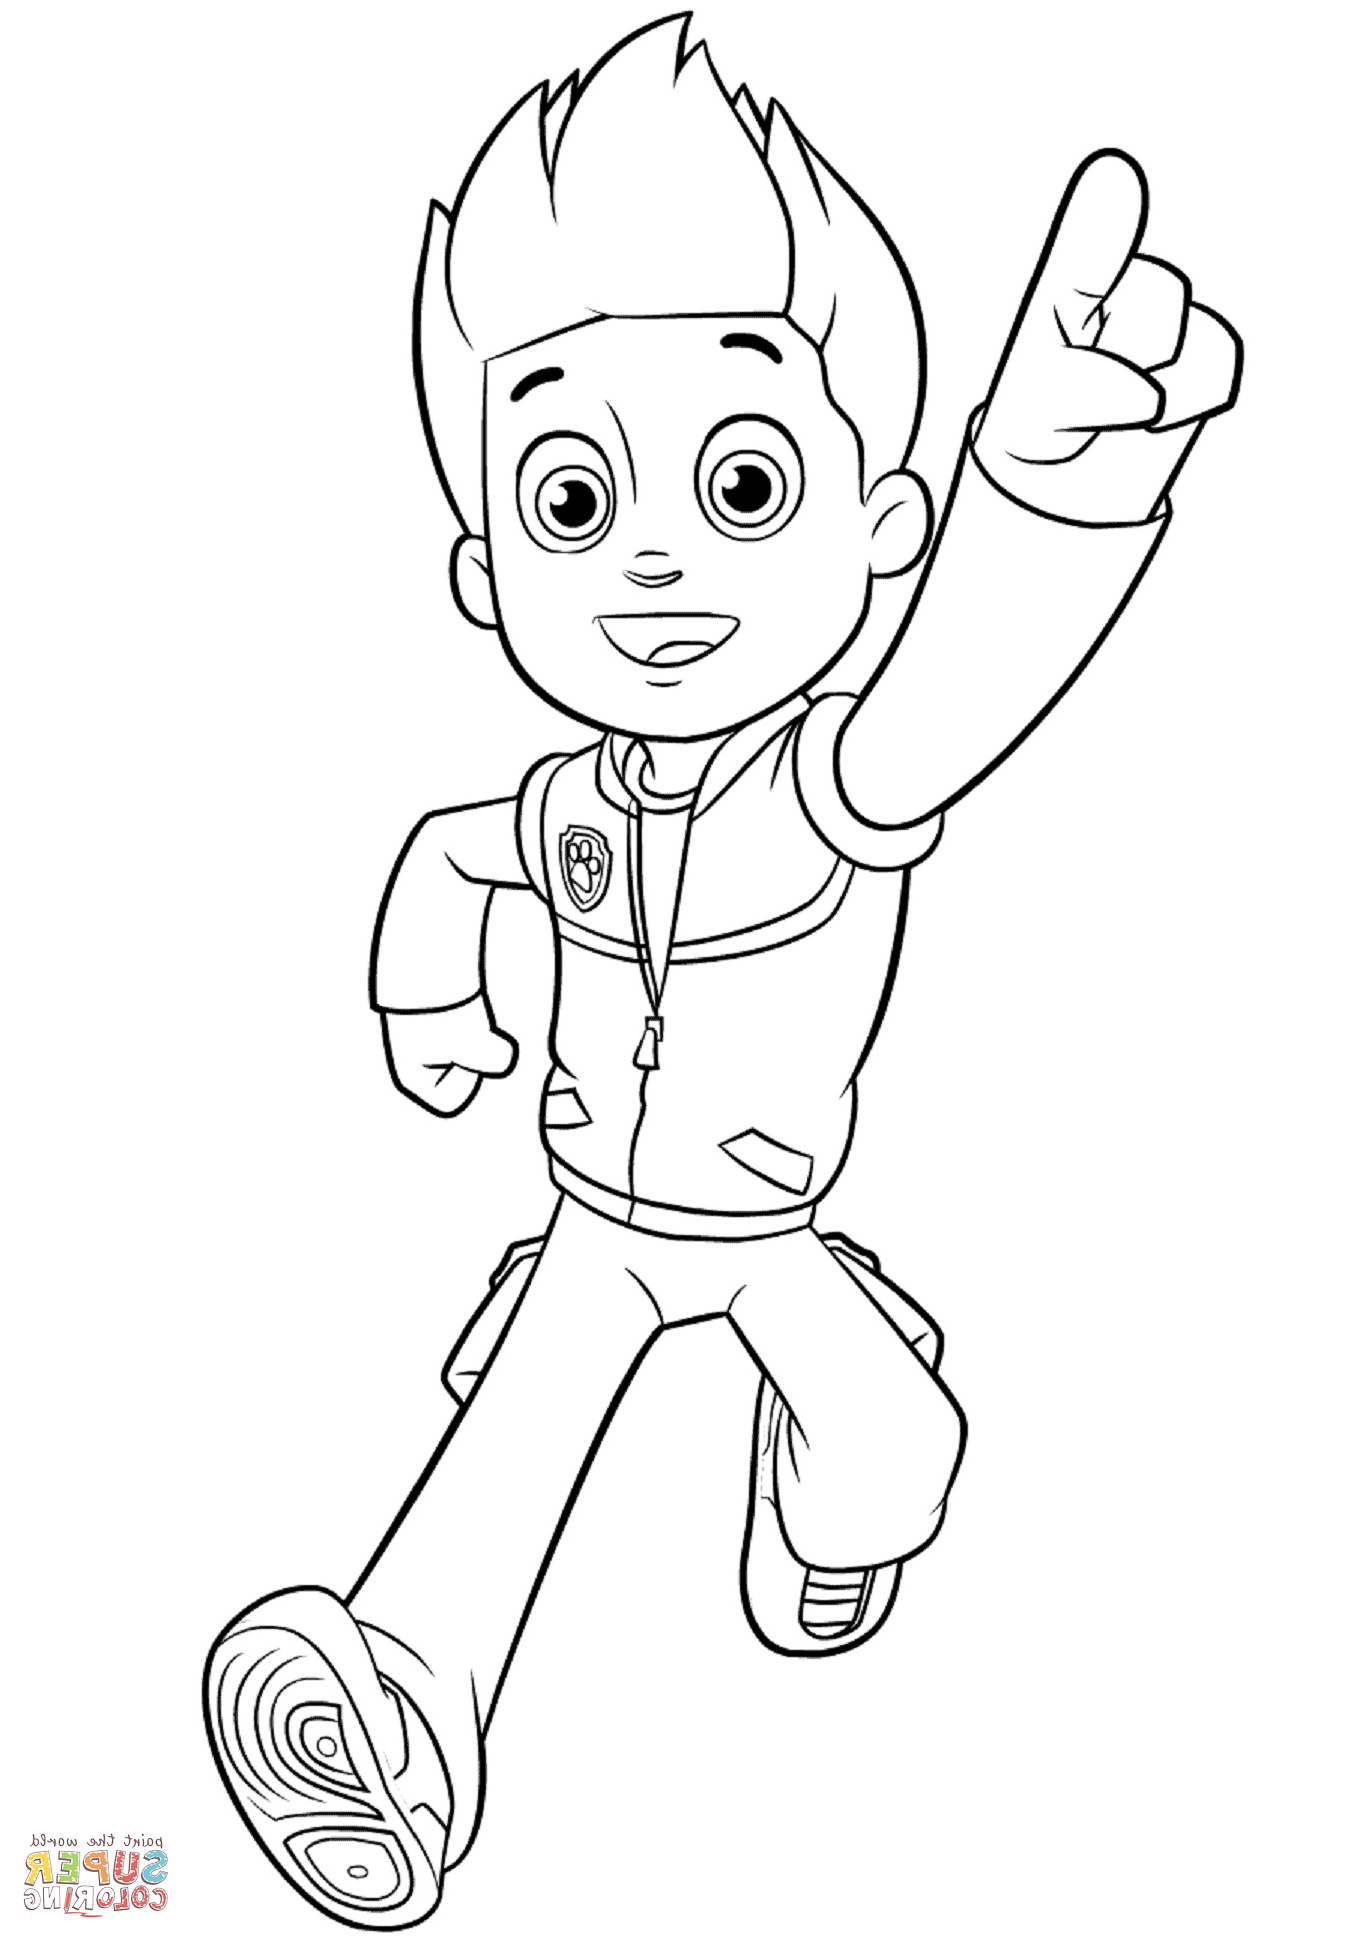 Coloriage Ryder Beau Image Coloriage Paw Patrol Ryder